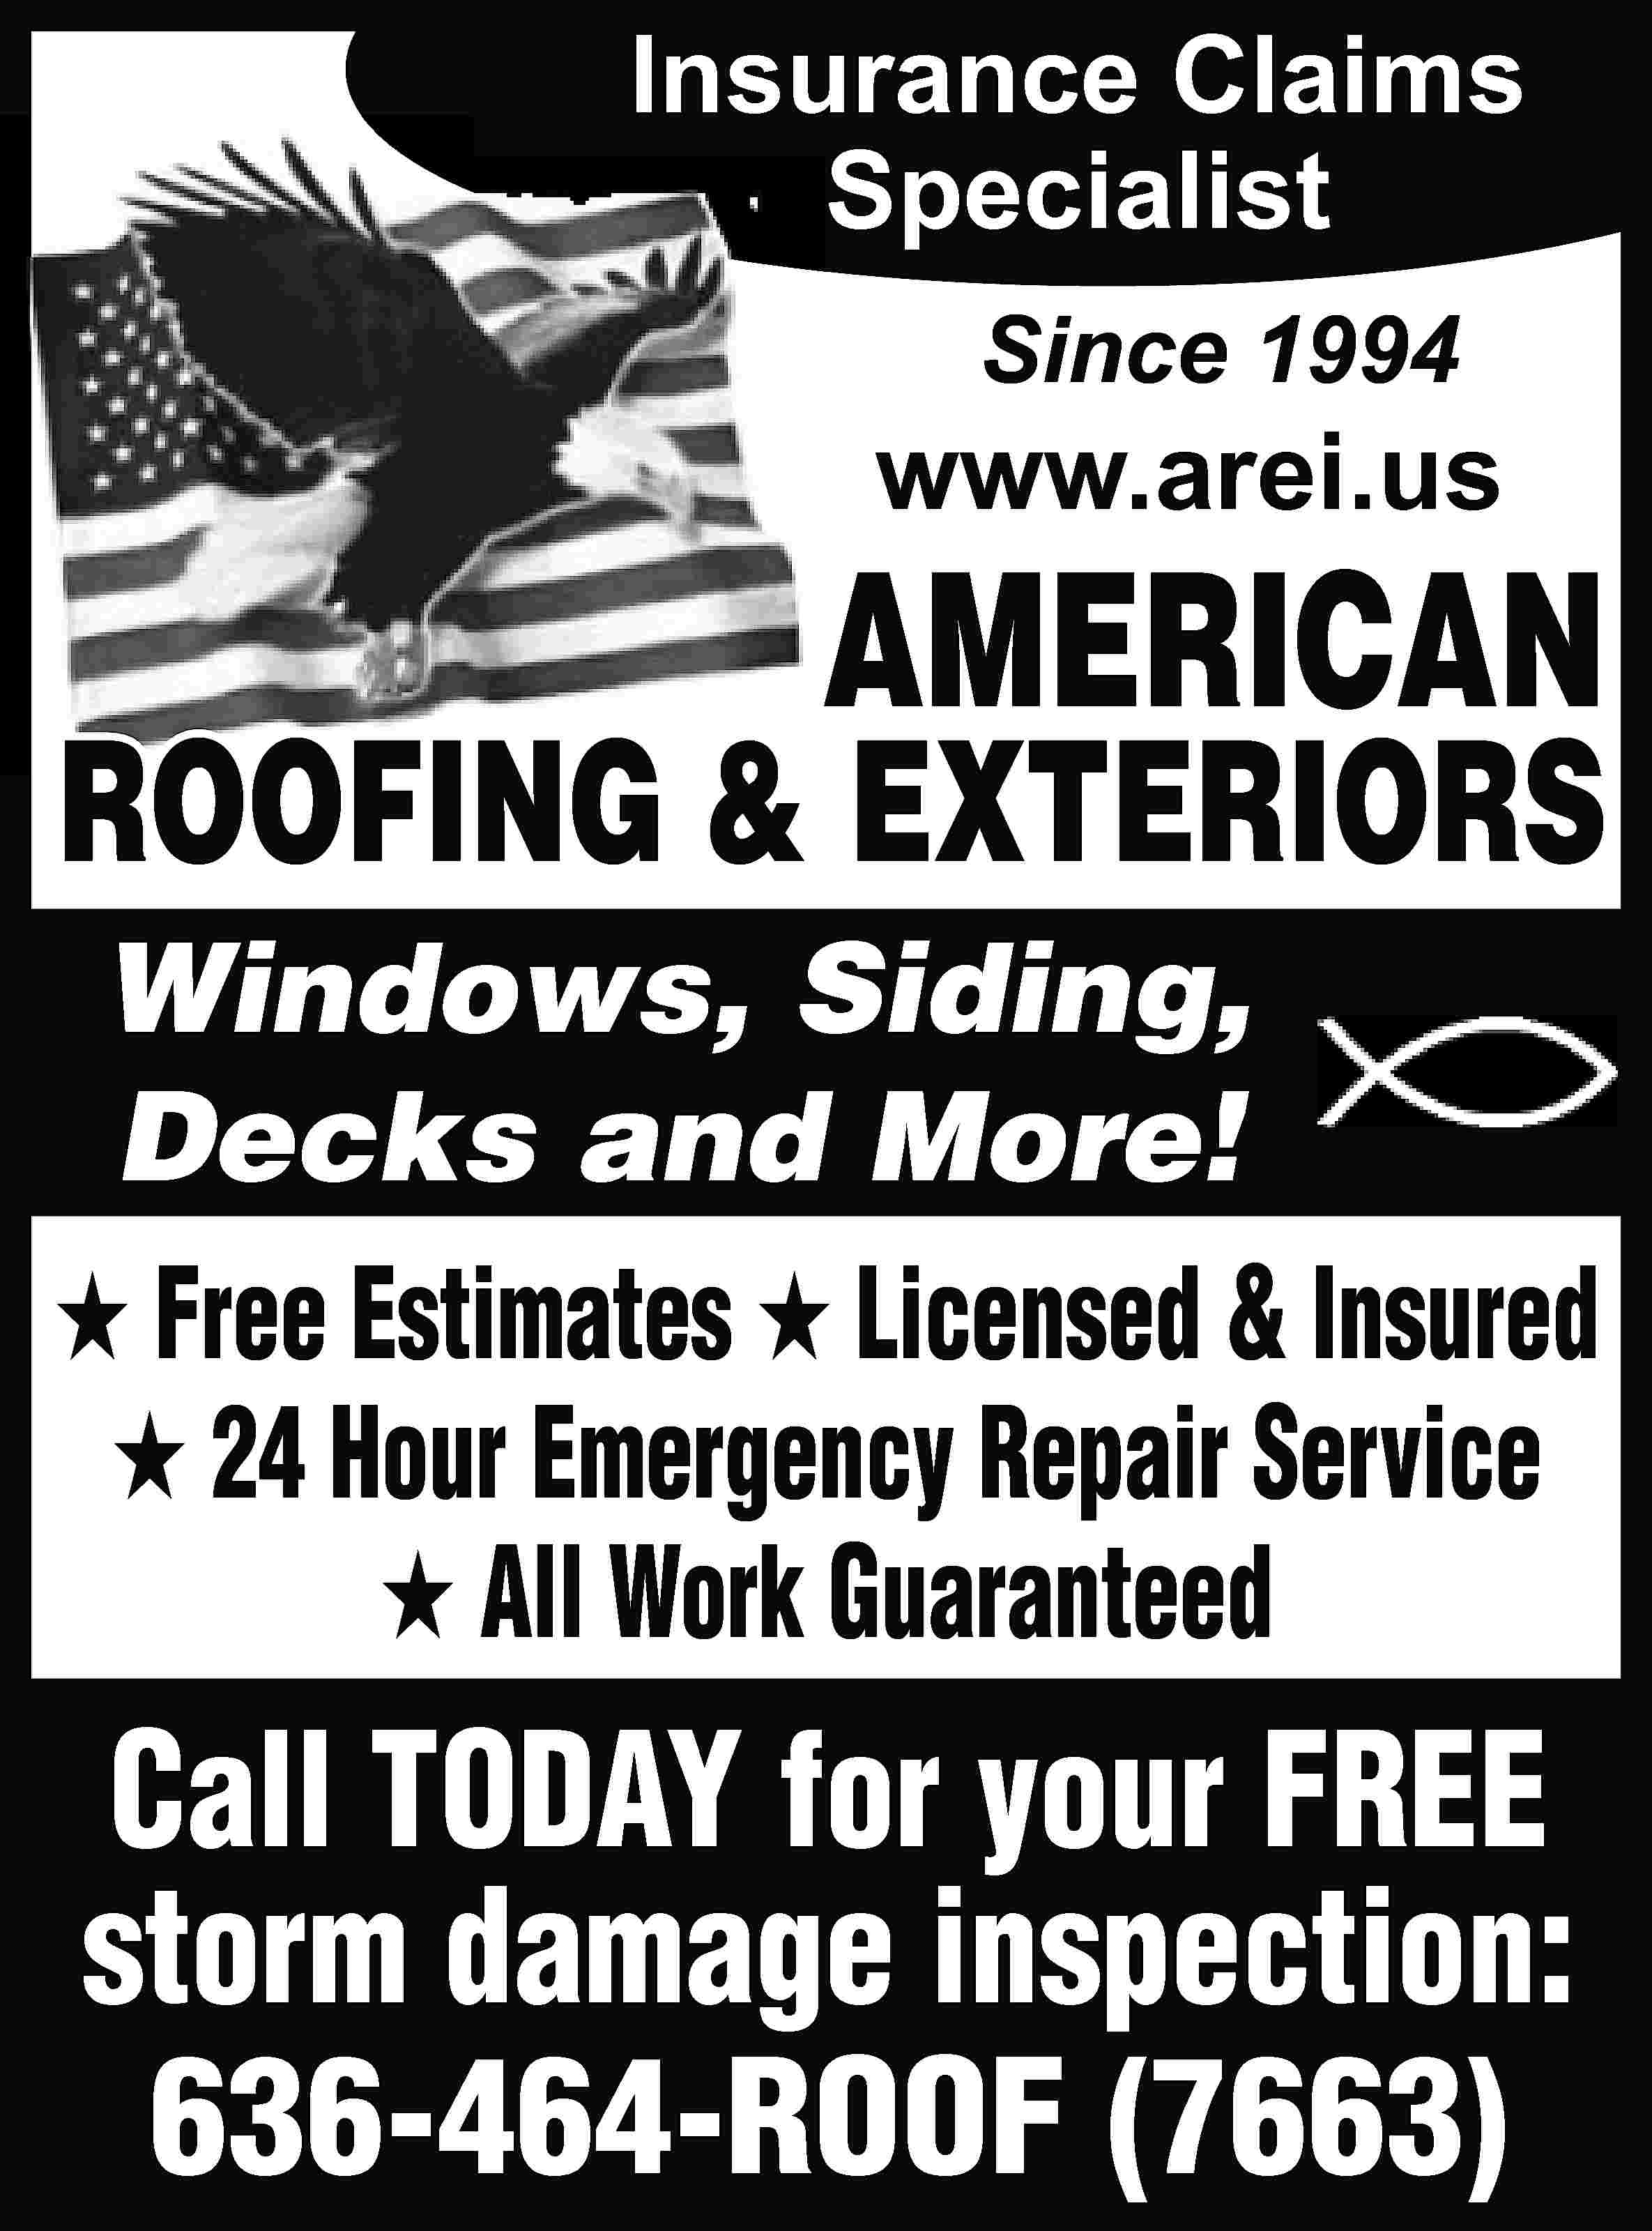 Insurance Claims Specialist Since 1994  Insurance Claims Specialist Since 1994 www.arei.us AMERICAN ROOFING & EXTERIORS ROOFI Windows, Siding, Decks and More! ★ Free Estimates ★ Licensed & Insured ★ 24 Hour Emergency Repair Service ★ All Work Guaranteed Call TODAY for your FREE storm damage inspection: 636-464-ROOF (7663)